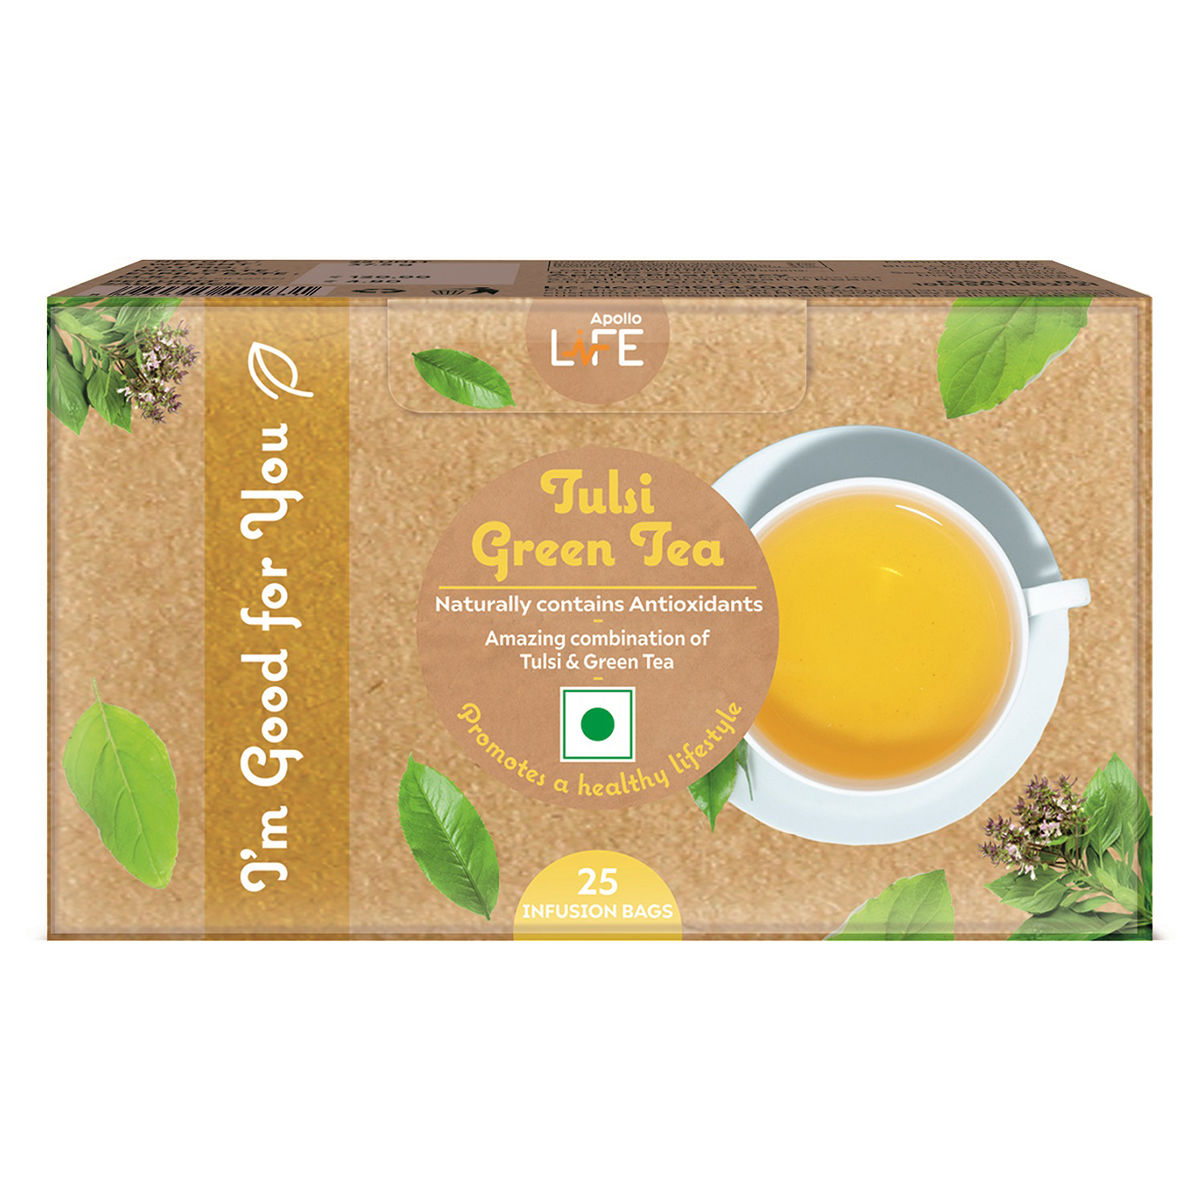 Buy Apollo Life Tulsi Green Tea Infusion Bags, 25 Count Online